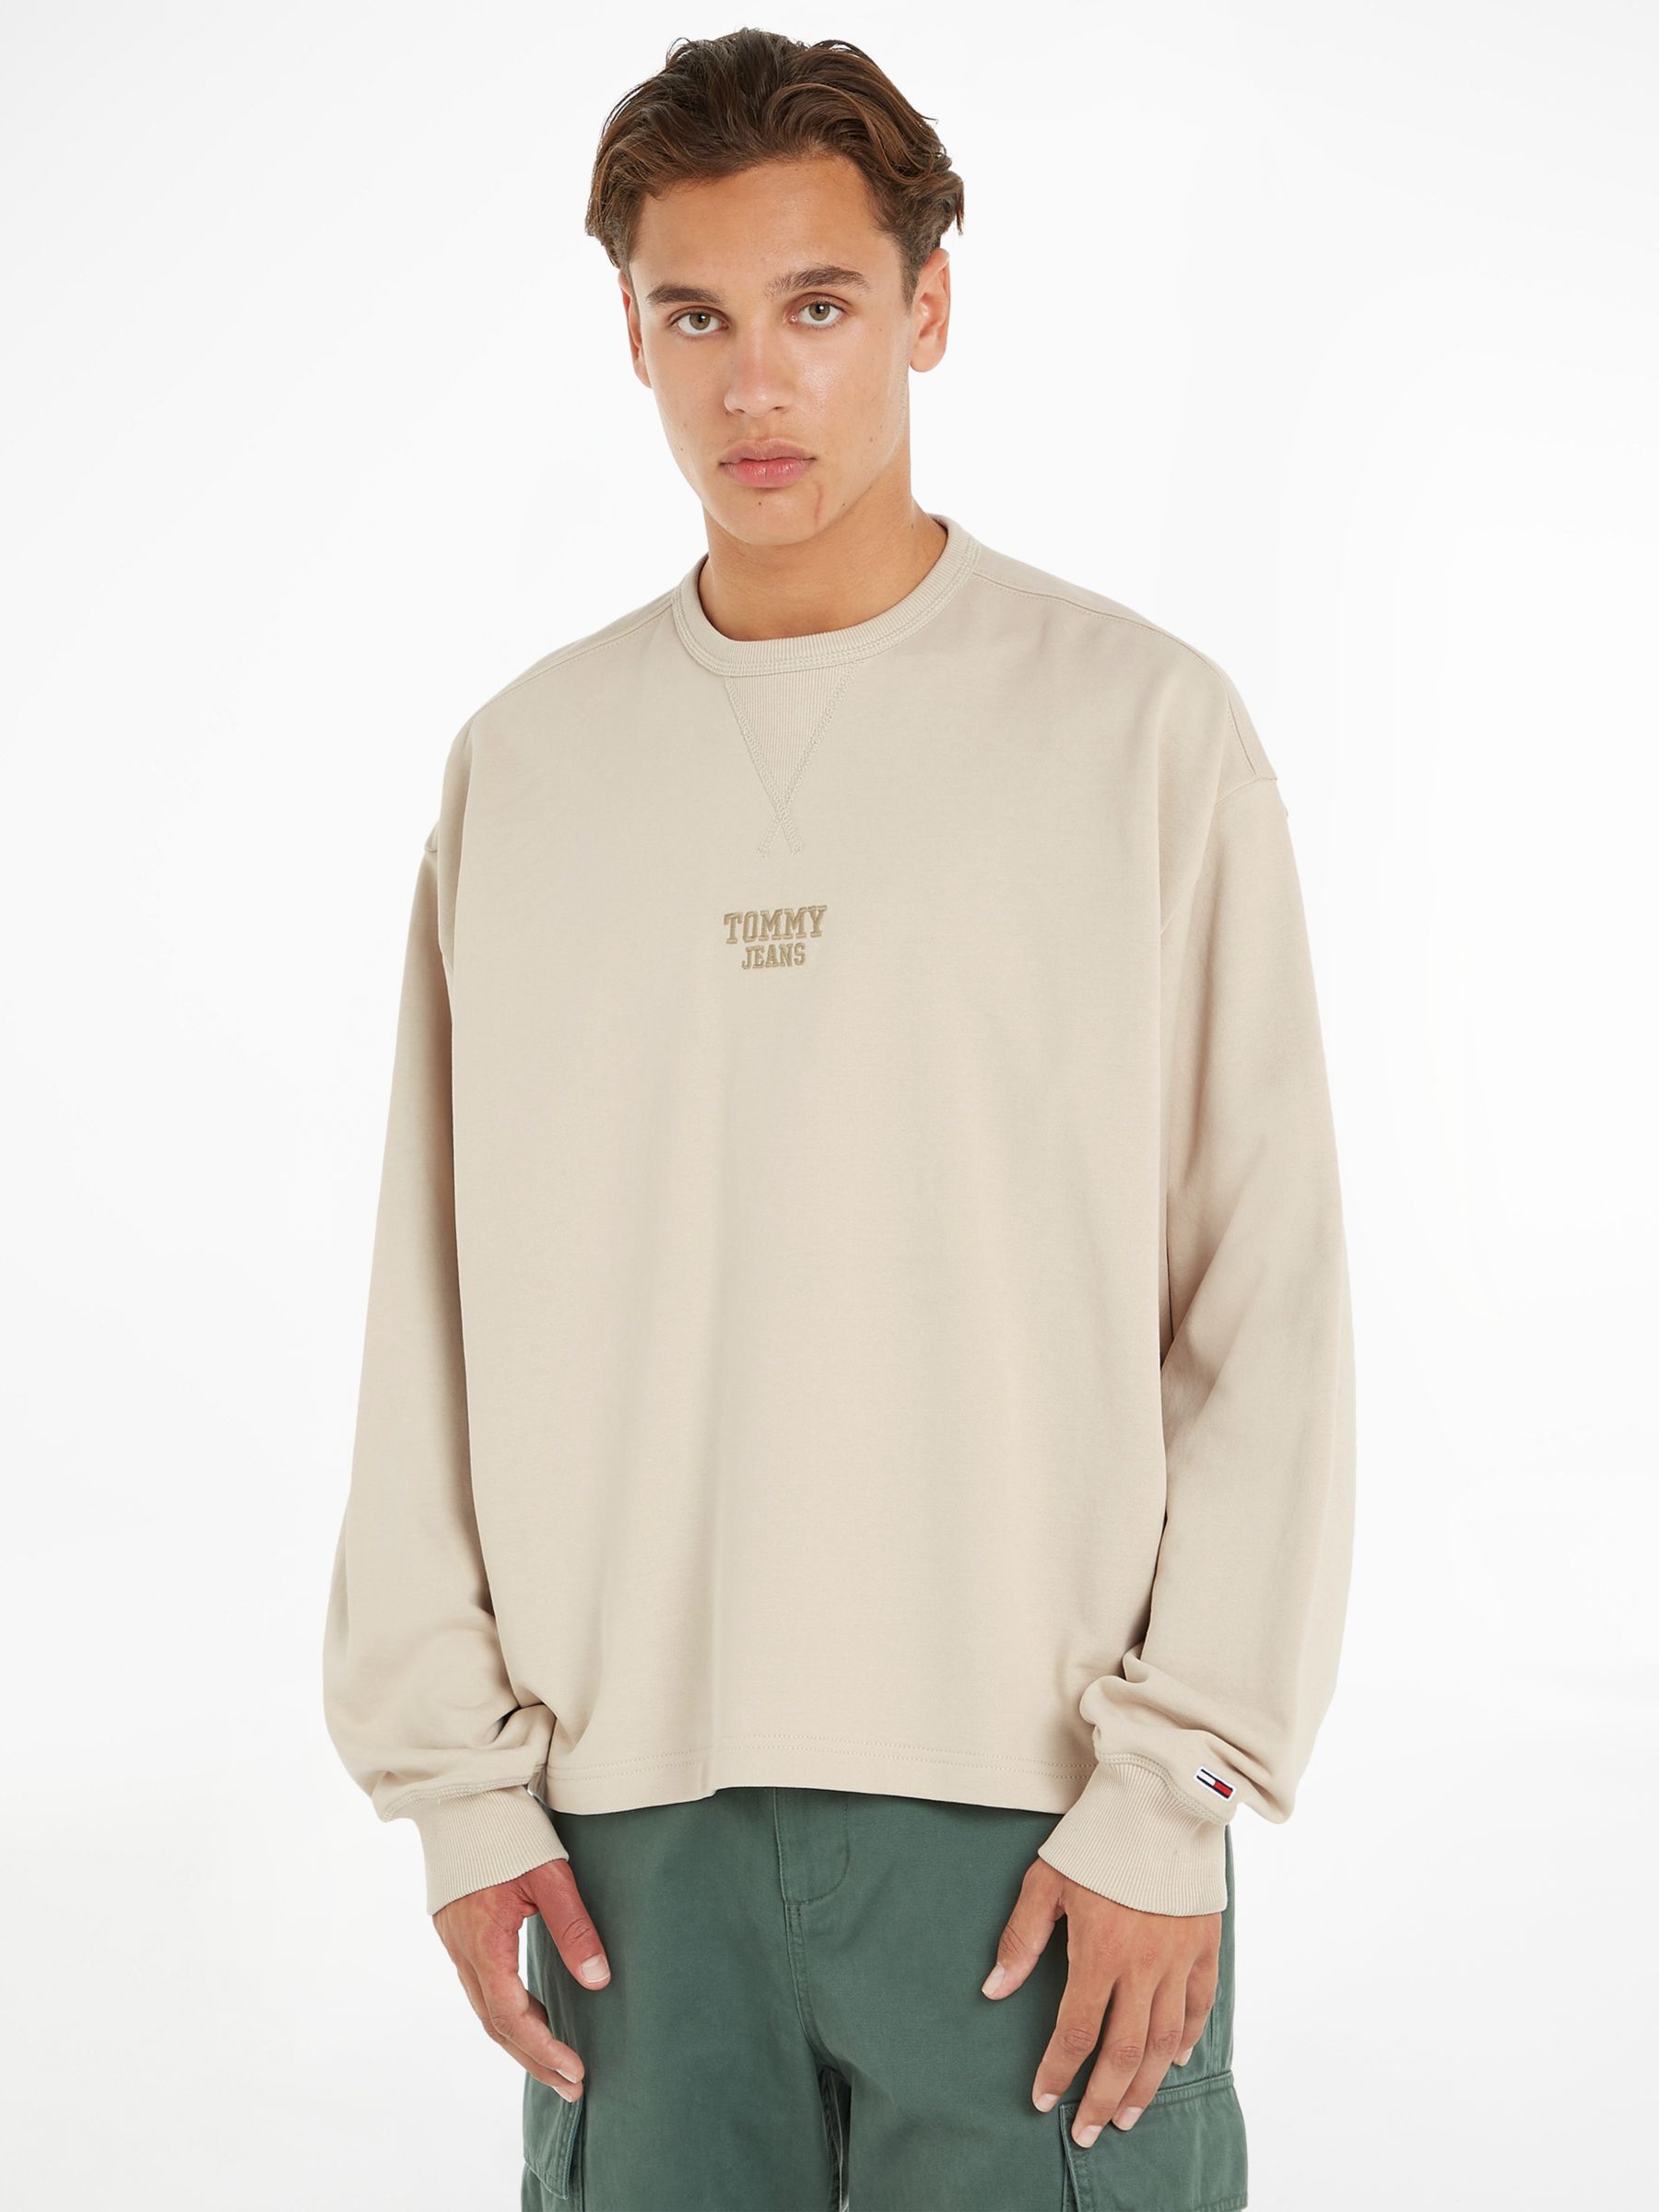 Buy Tommy Jeans Relaxed Logo Sweatshirt, Classic Beige Online at johnlewis.com